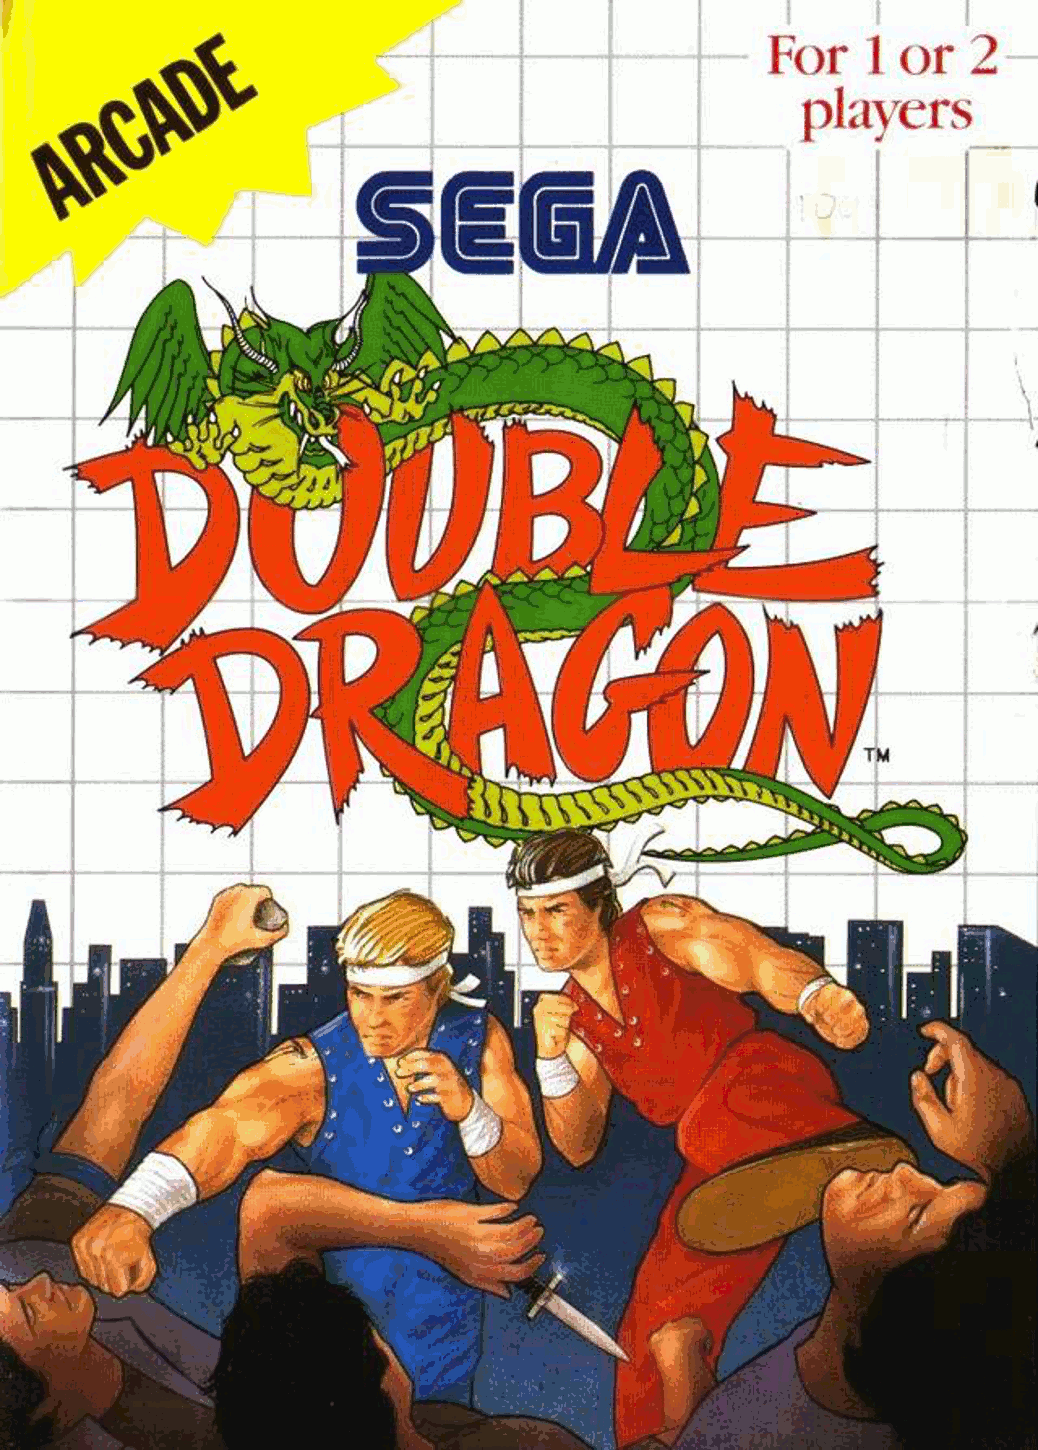 Double Dragon [Sega Master System] – Review and Let's Play